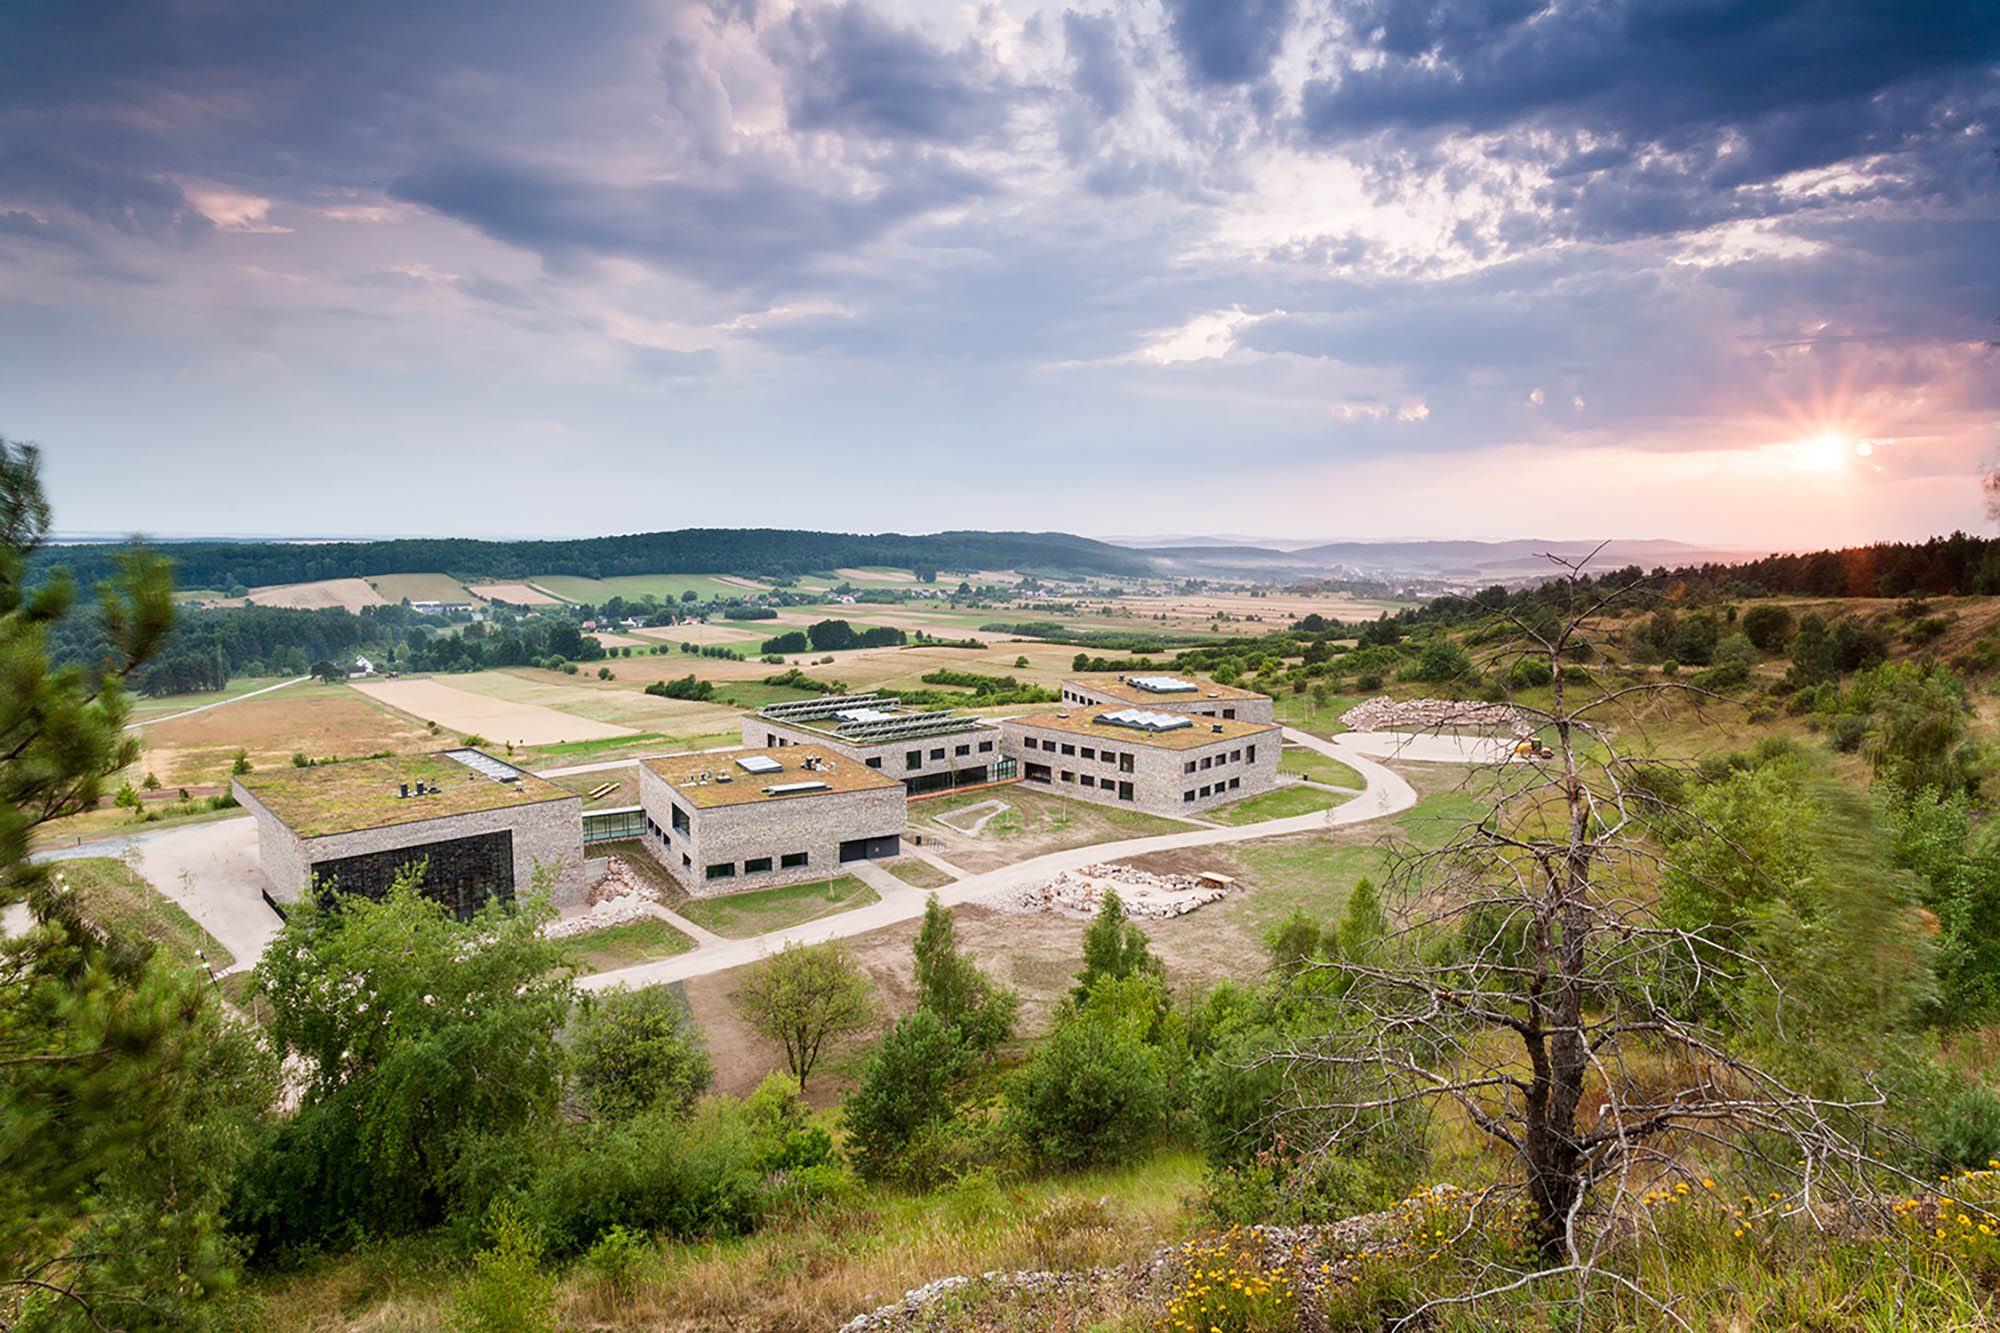 European Centre For Geological Education design by WXCA